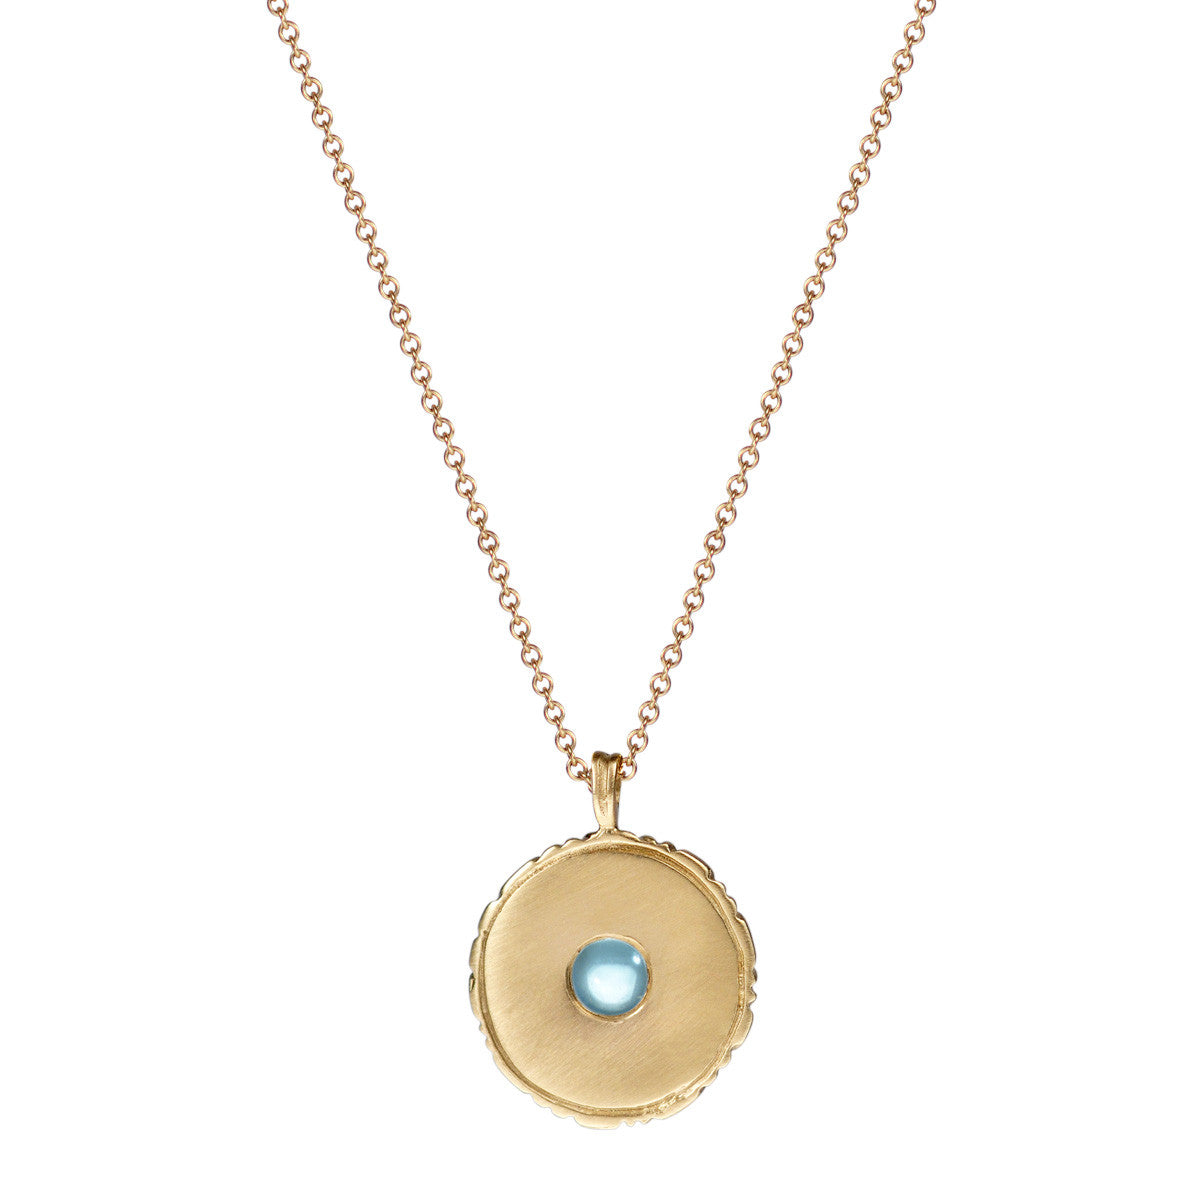 10K Gold Strength is Having a Graceful Life Pendant with Sky Blue Topaz